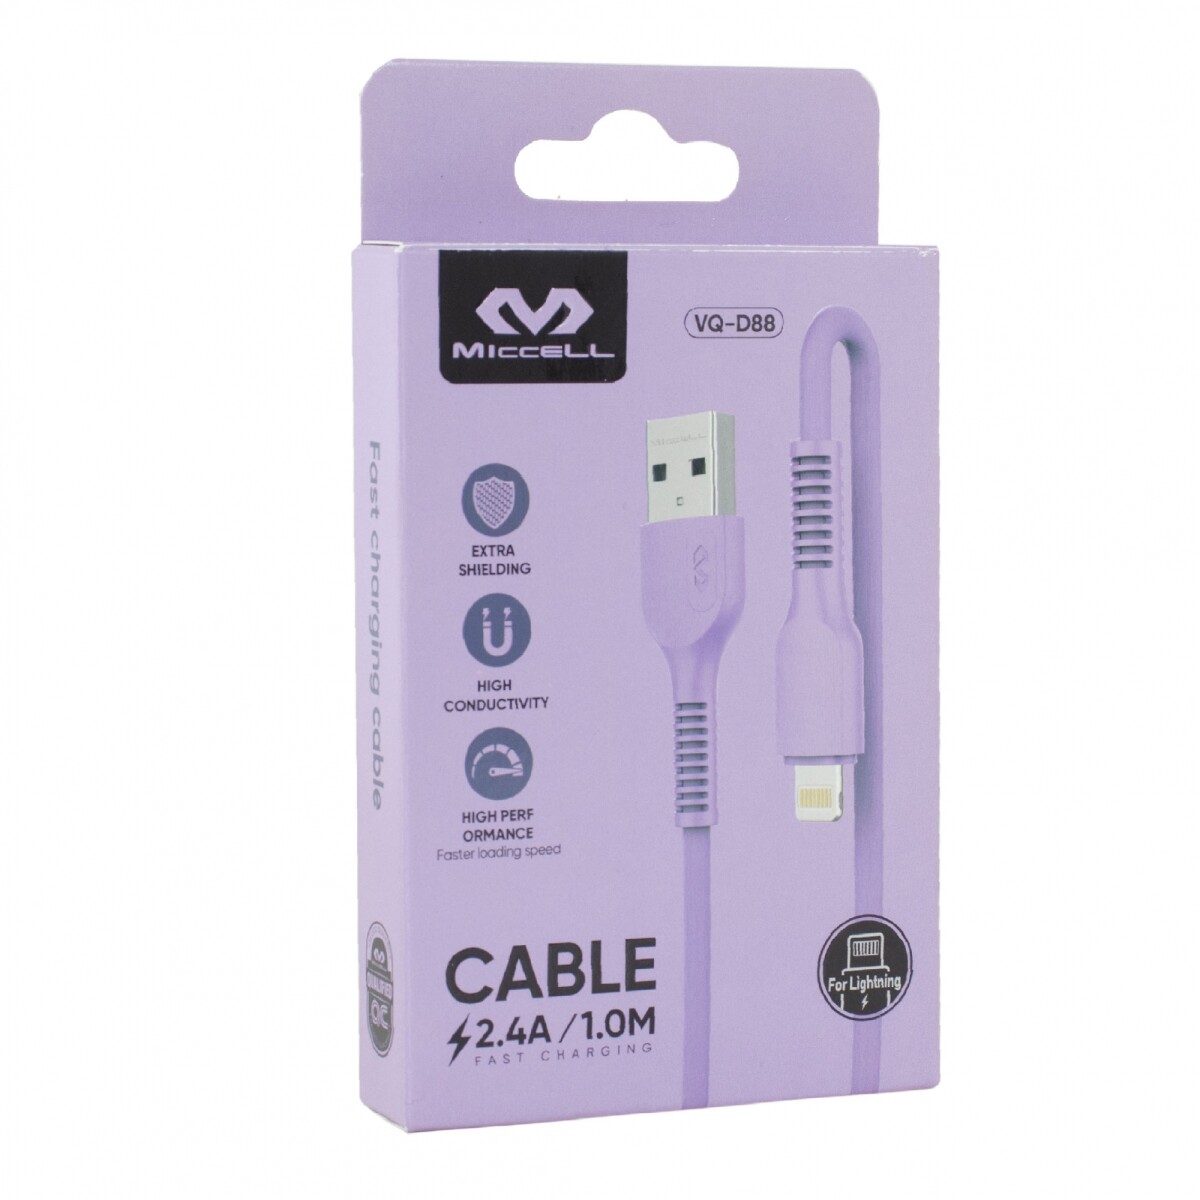 Cable Para iPhone Miccell 2.4a 1.0m Violeta 